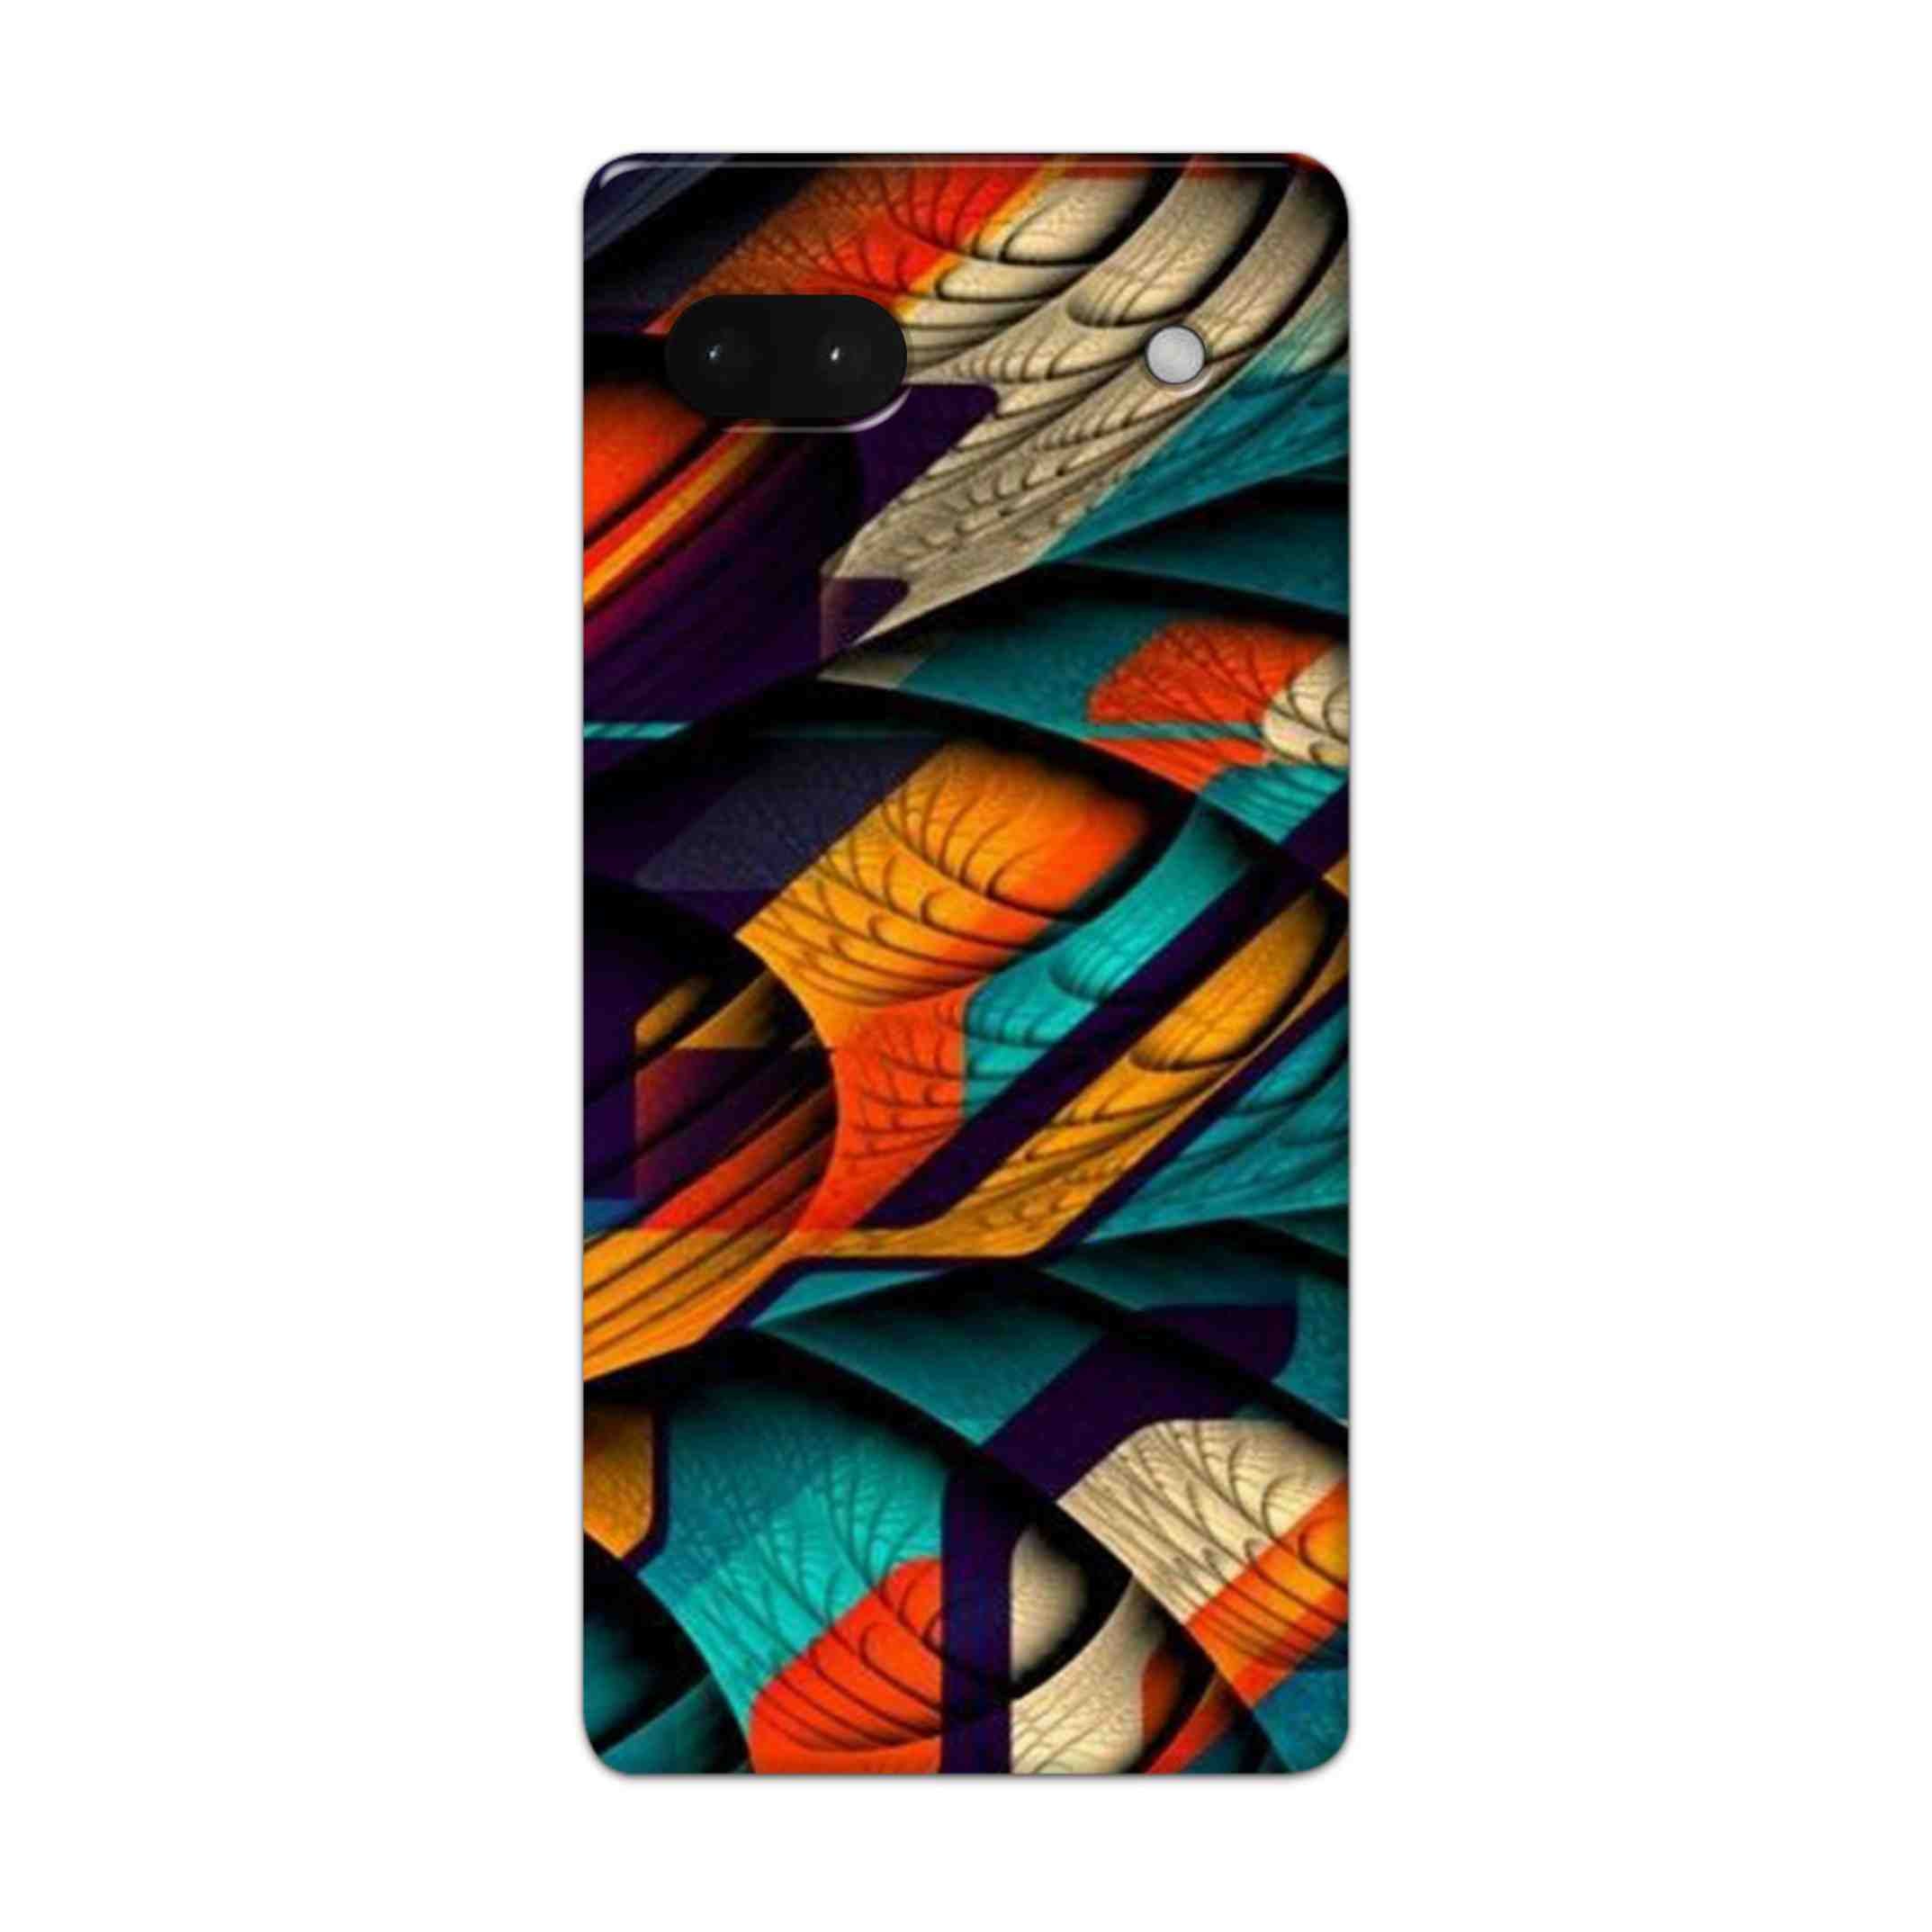 Buy Colour Abstract Hard Back Mobile Phone Case Cover For Google Pixel 6a Online